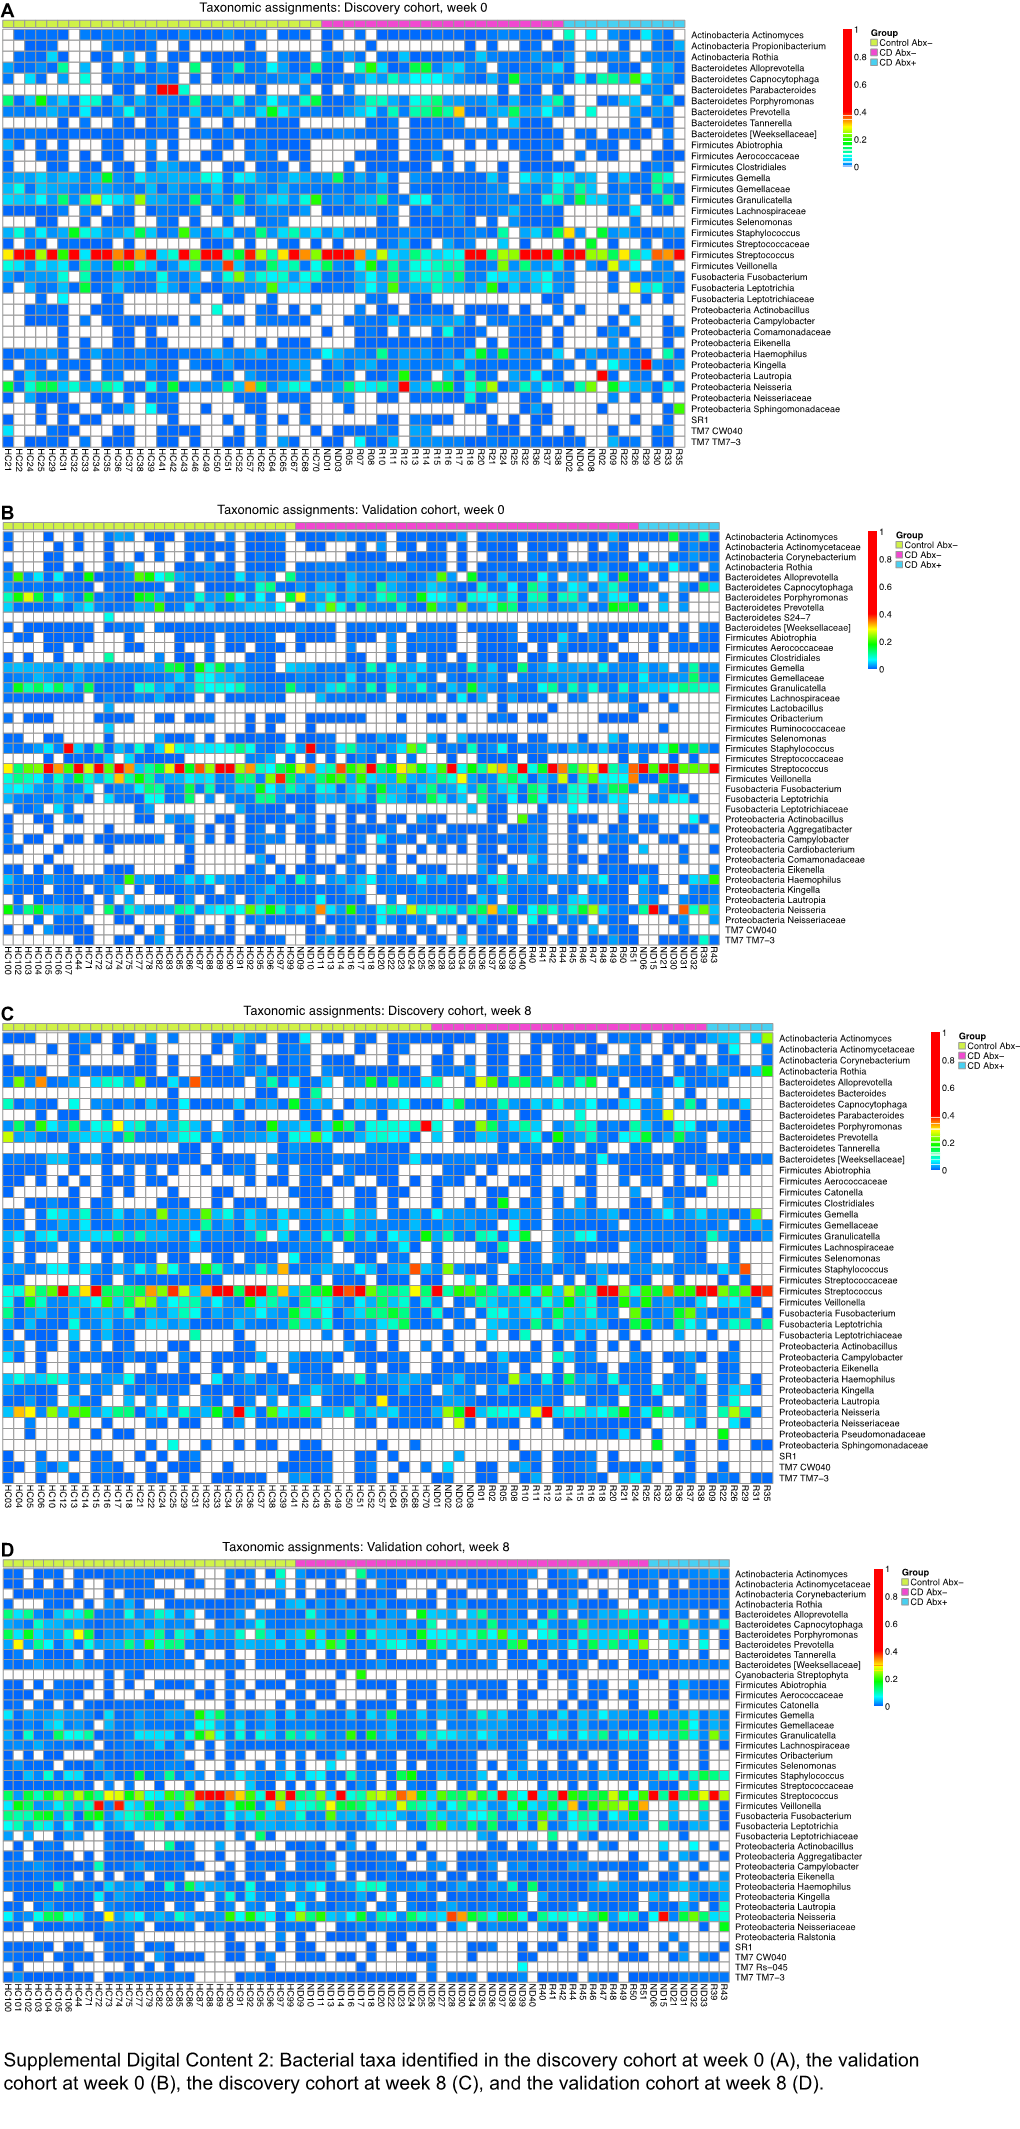 Bacterial Taxa Identified in the Discovery Cohort at Week 0